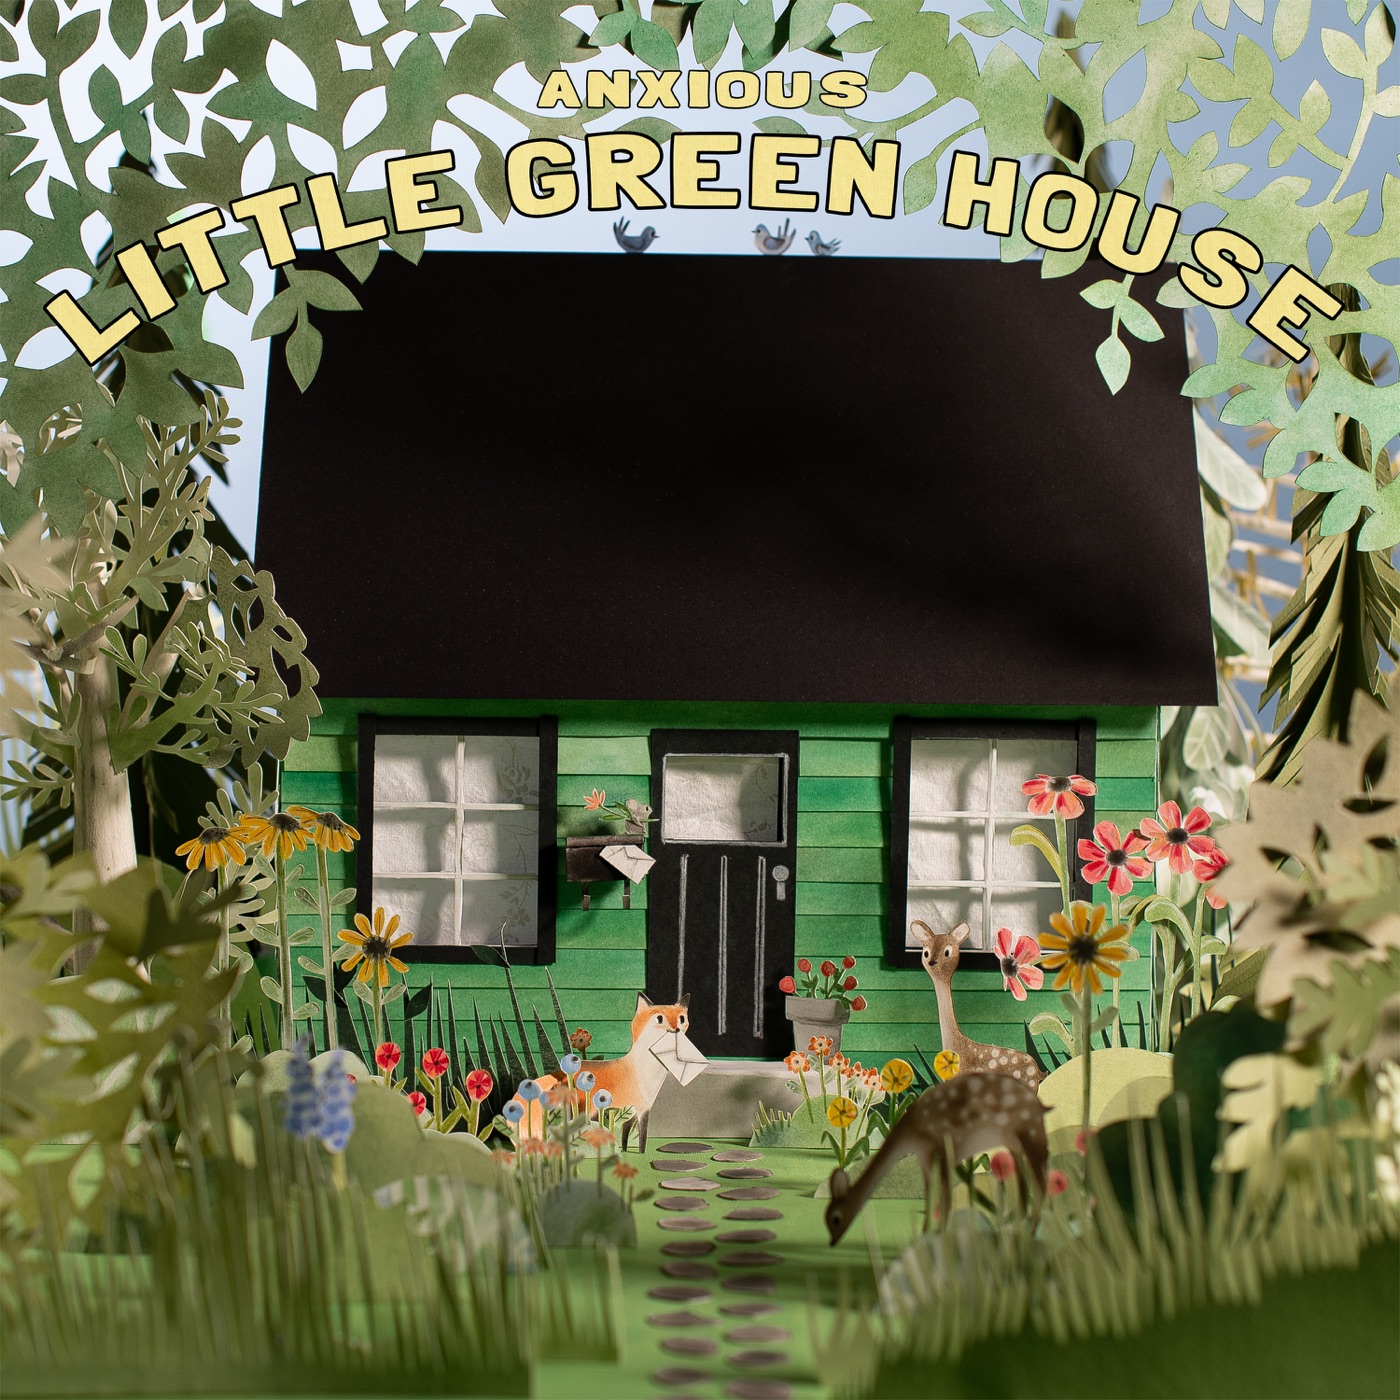 Little Green House by Anxious